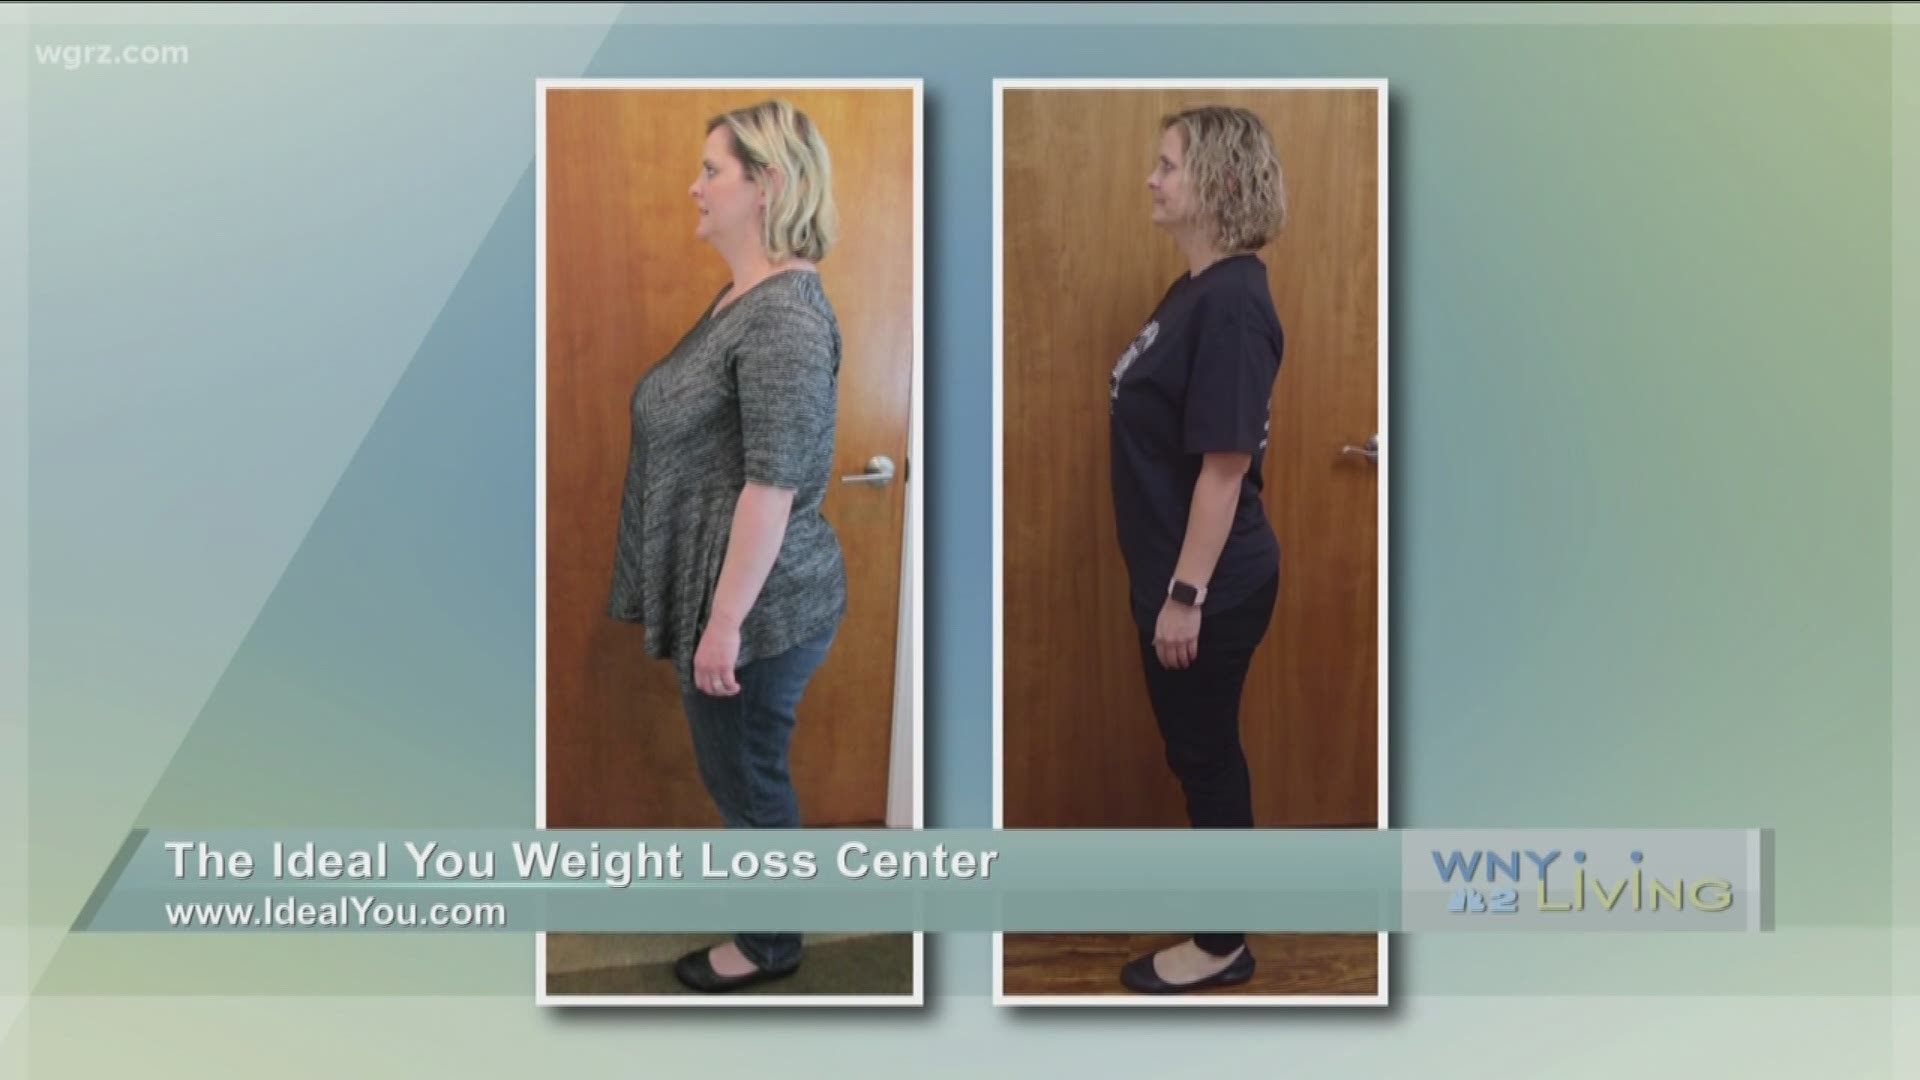 WNY Living - January 14 - The Ideal You Weight Loss Center